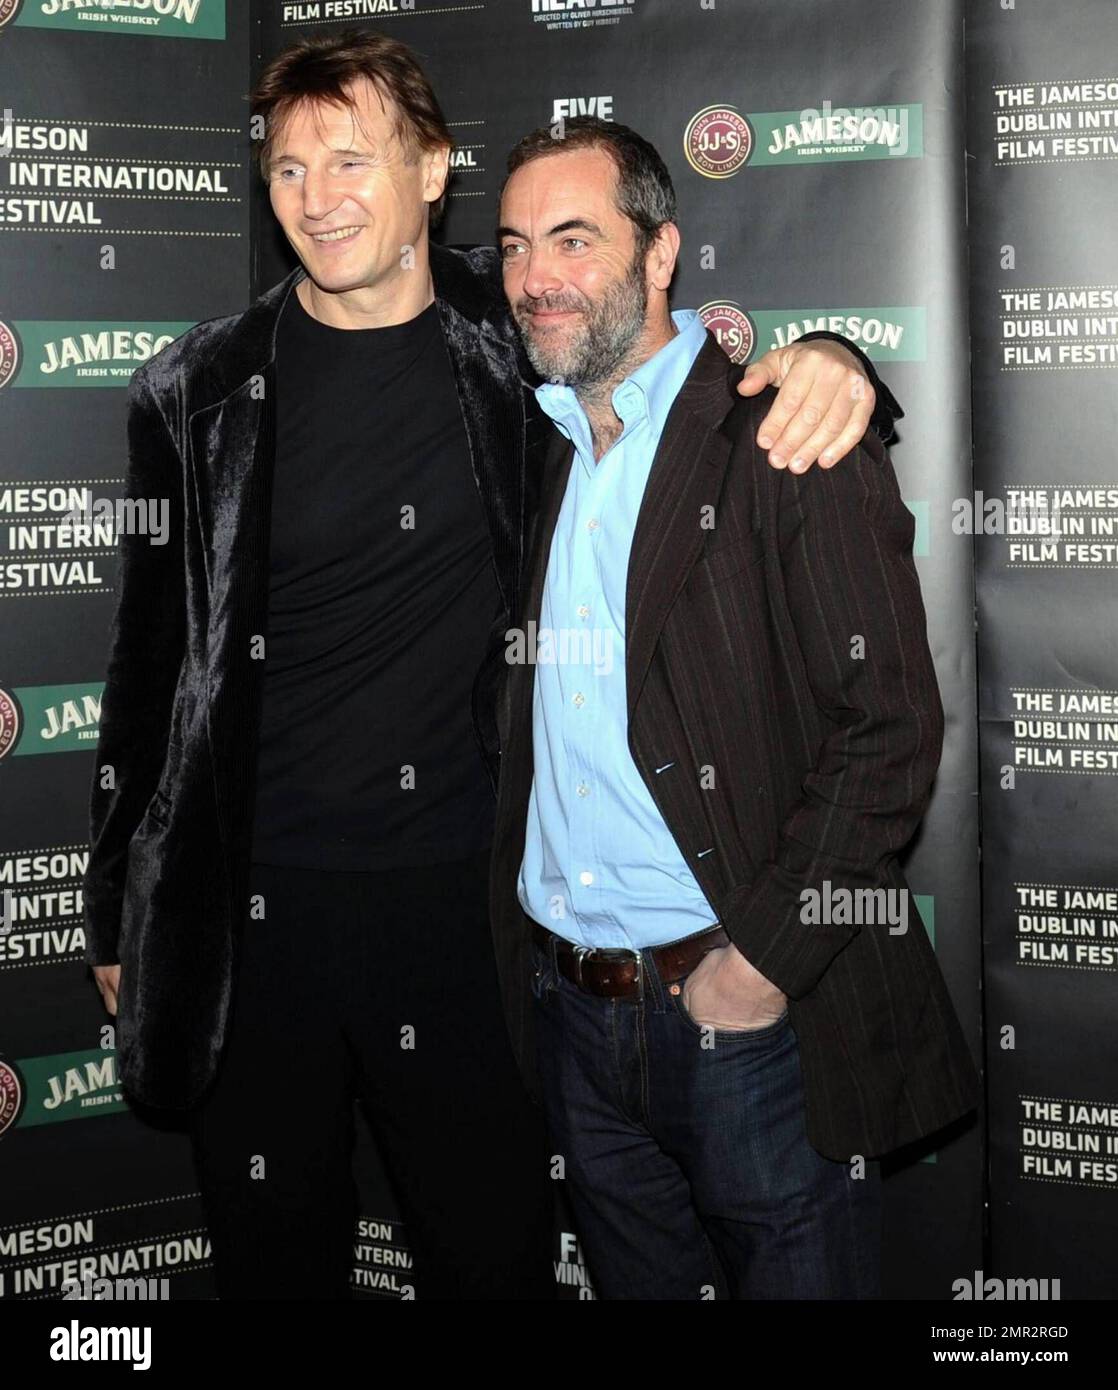 Irish actor Liam Neeson and James Nesbitt arrive at the movie premier for Five  Minutes To Heaven at the Jameson Dublin International Film Festival at he  Savoy cinema in Dublin, Ireland. 21/02/09